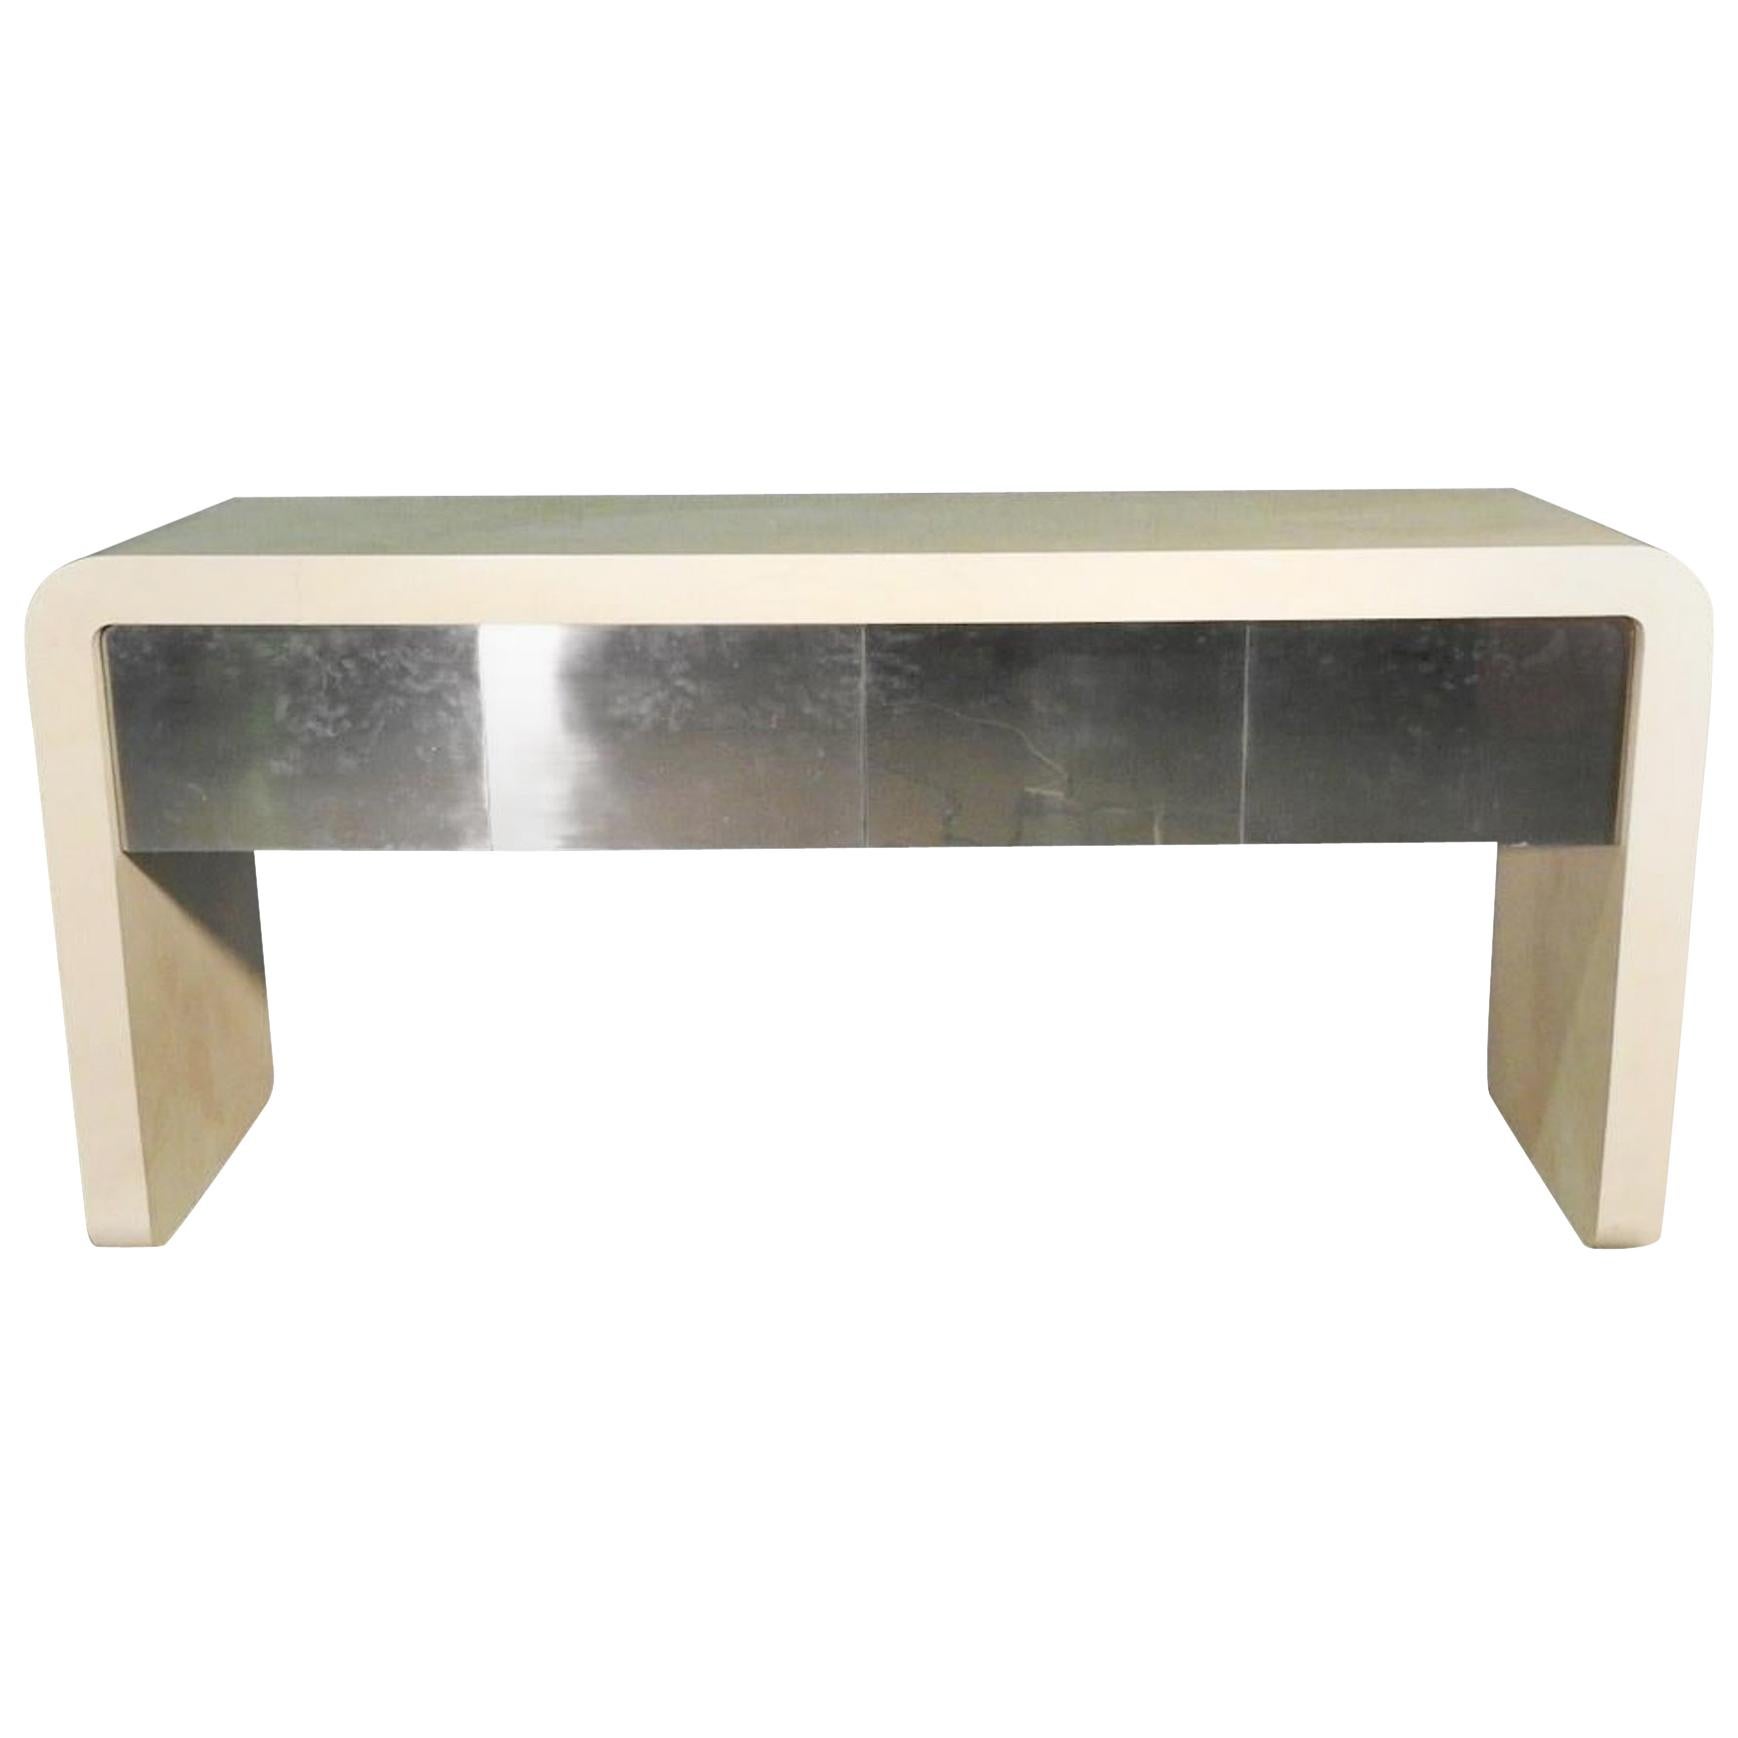 Mid-Century Faux Goatskin Console Table with Storage